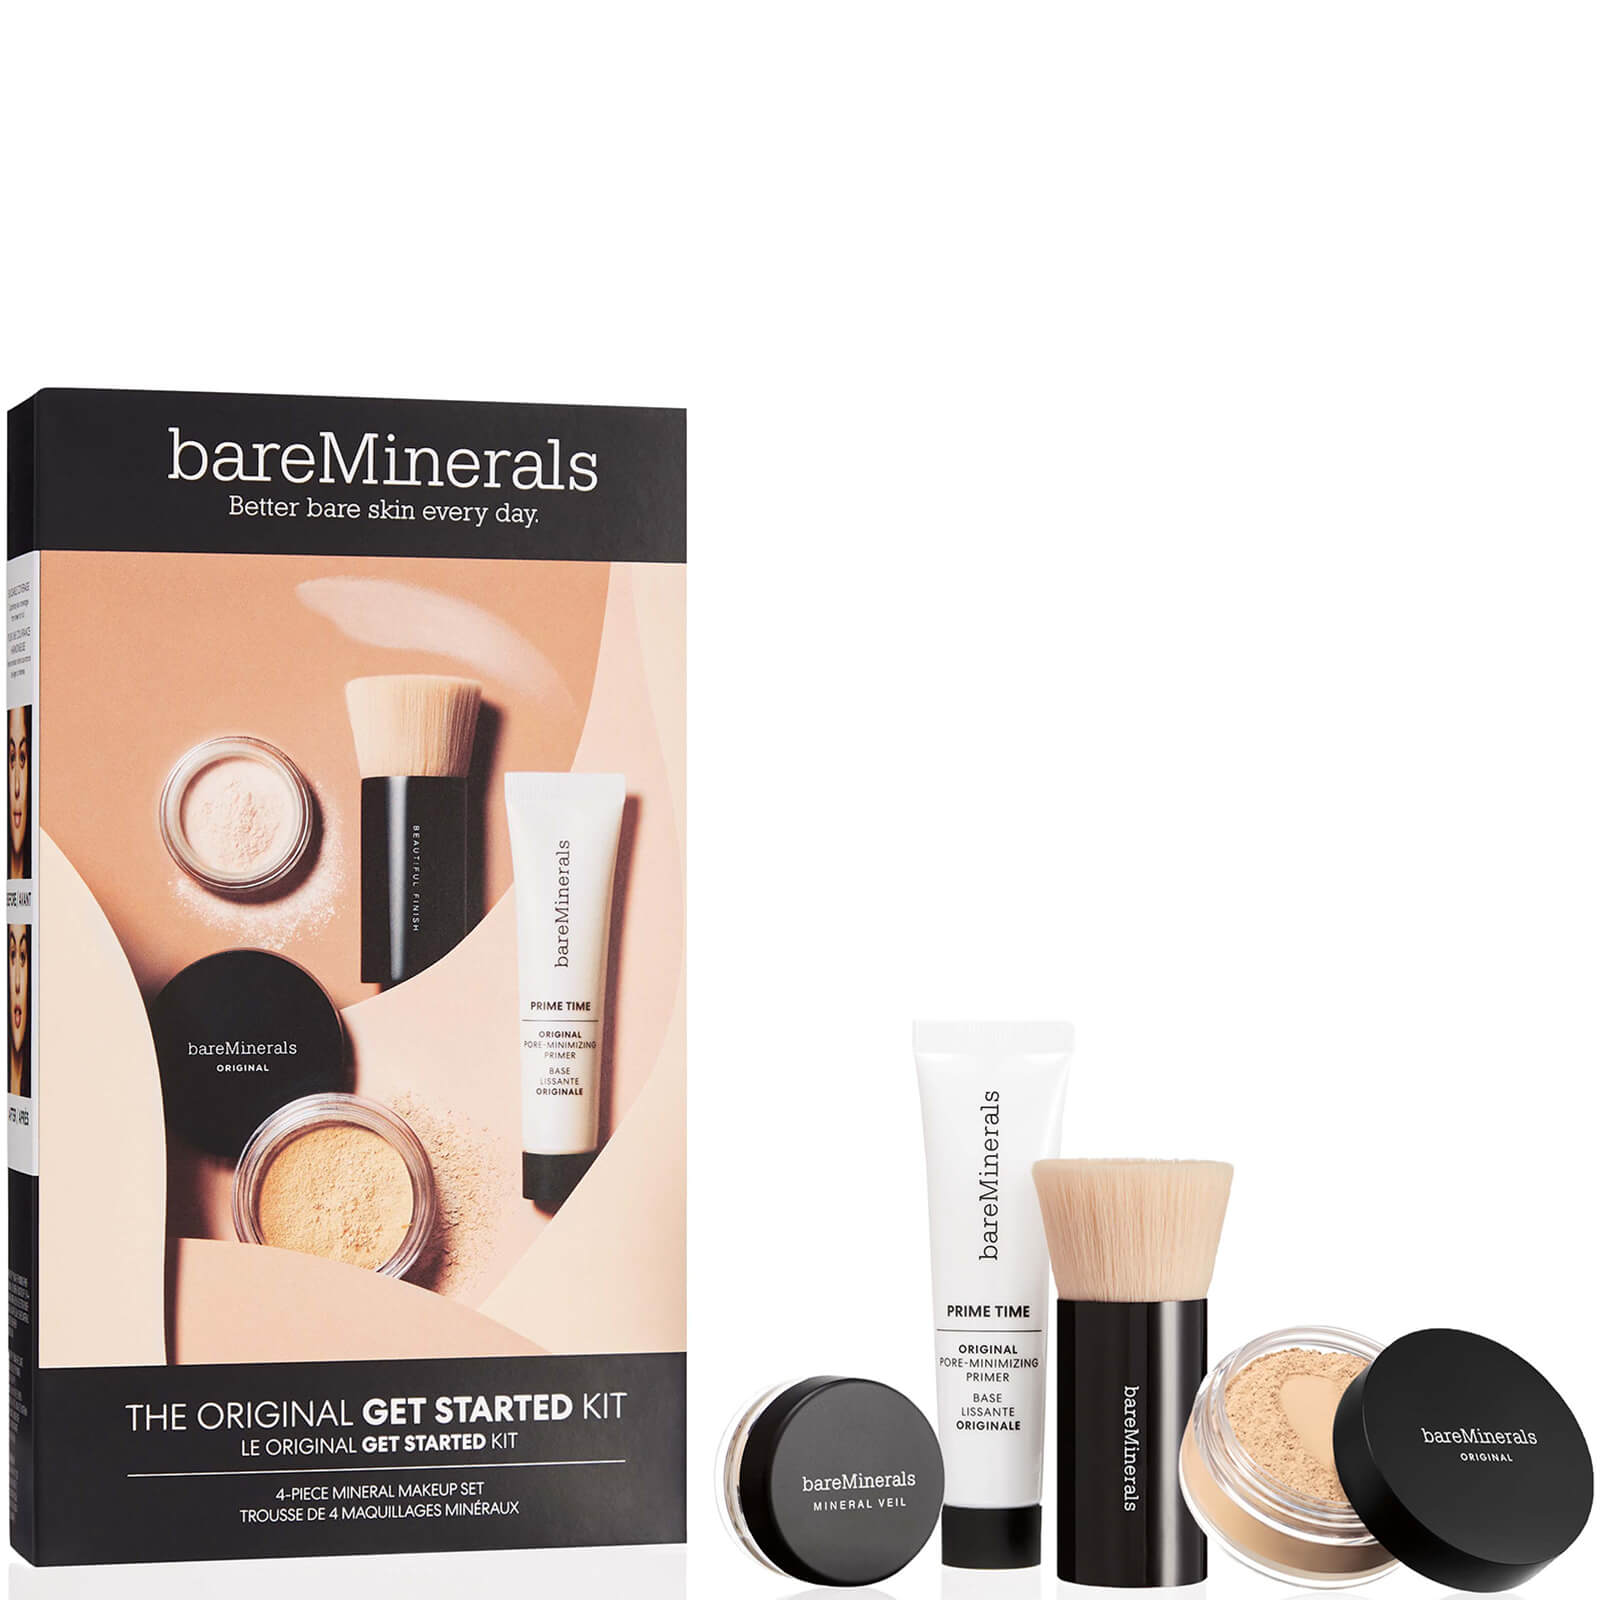 bareMinerals The Original Get Started Kit 4pc Mineral Makeup Set (Various Shades) - Fairly Light